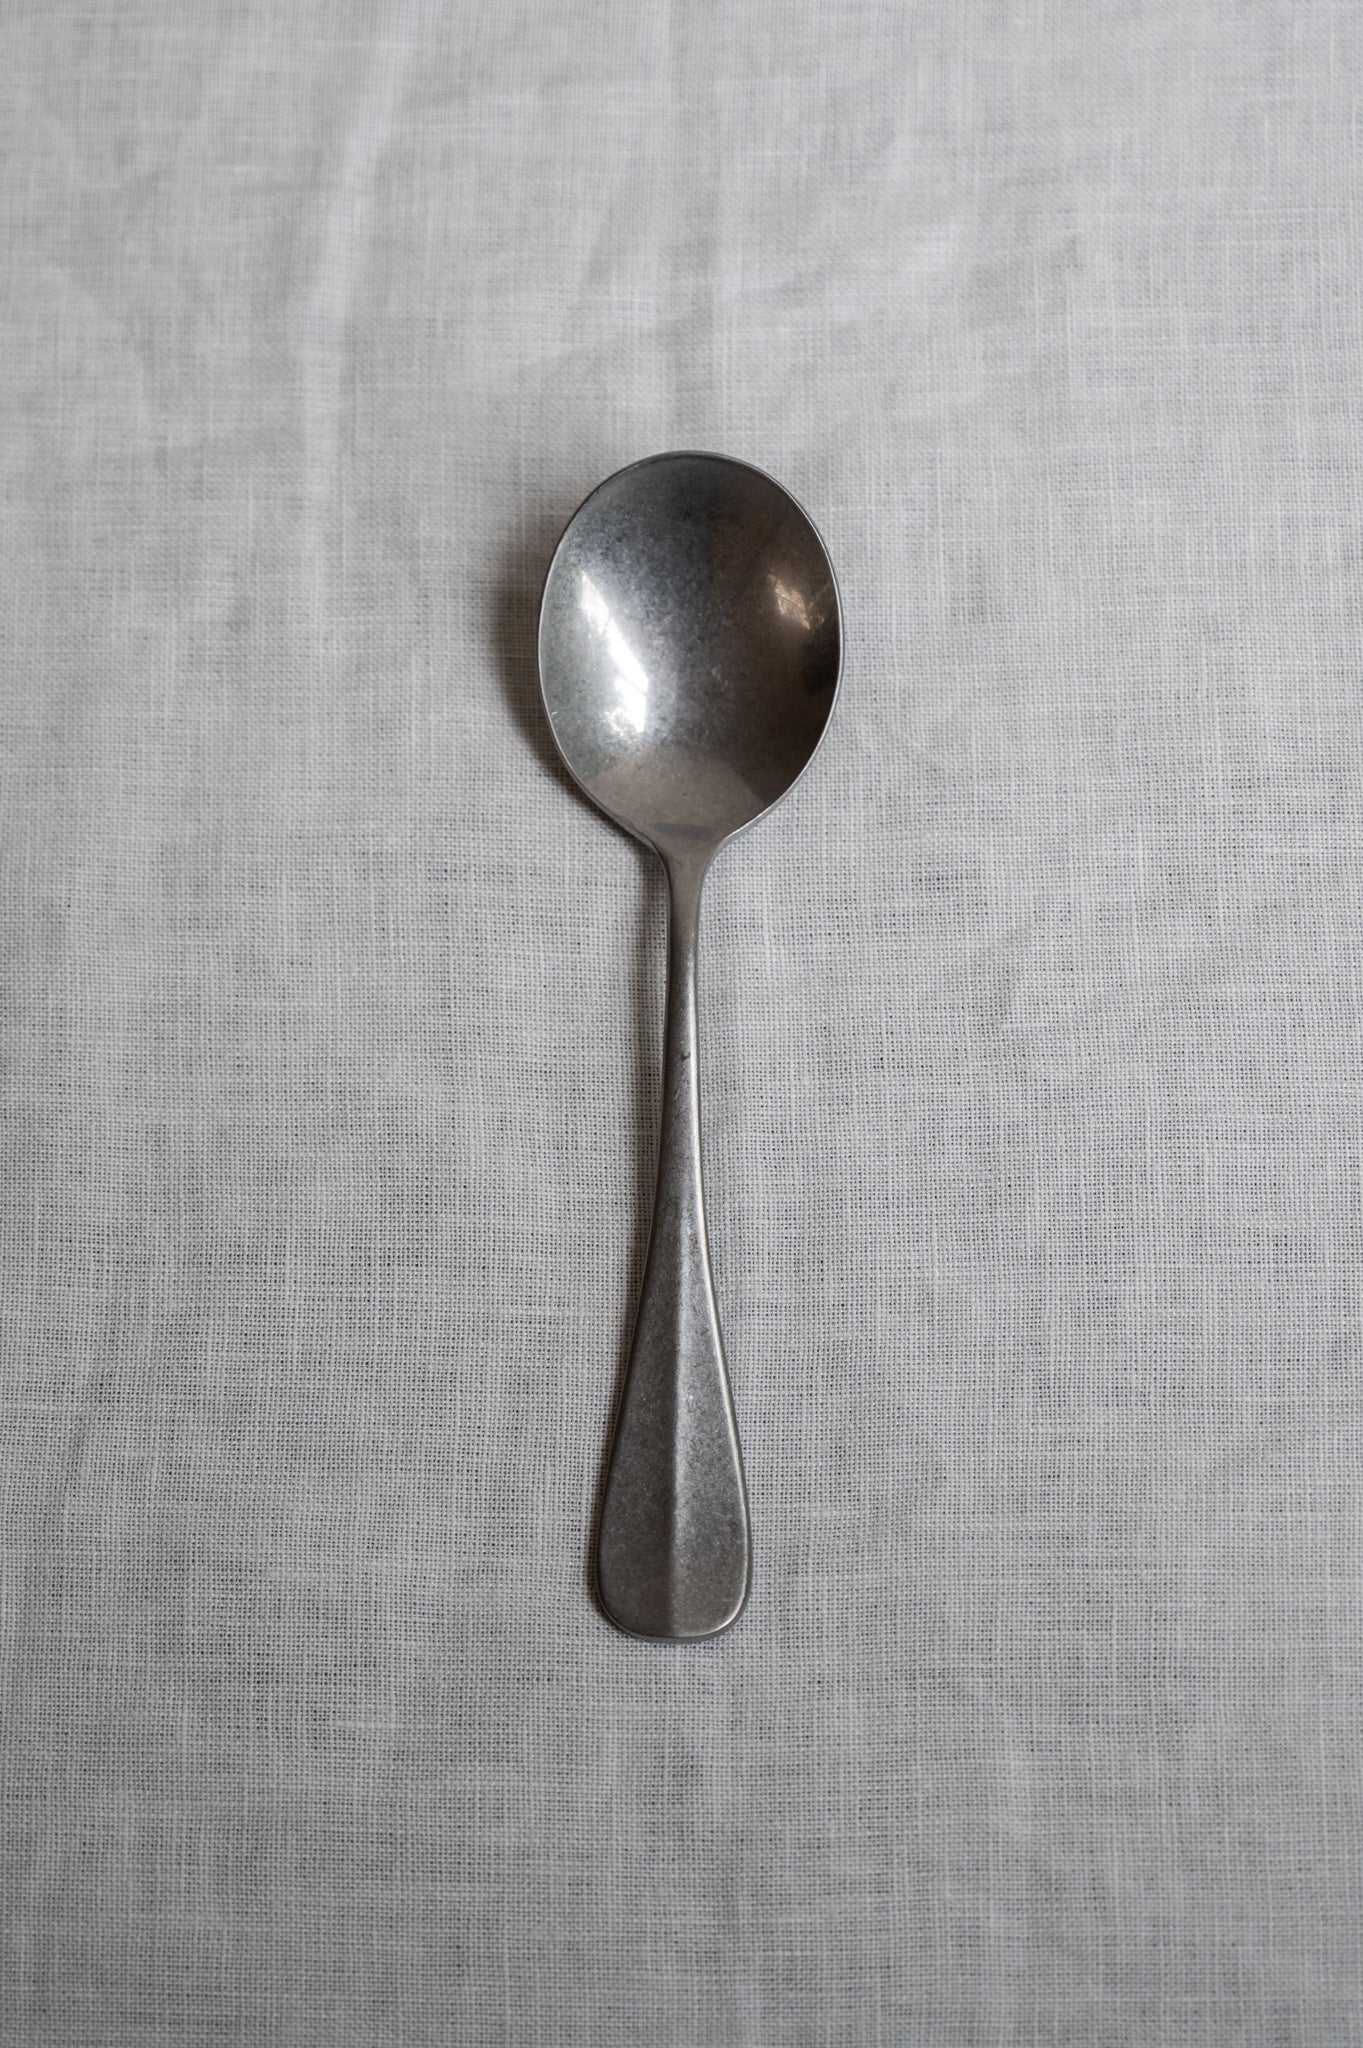 Bouillon Spoon from the Baguette Vintage Serving Cutlery collection by Sambonet.